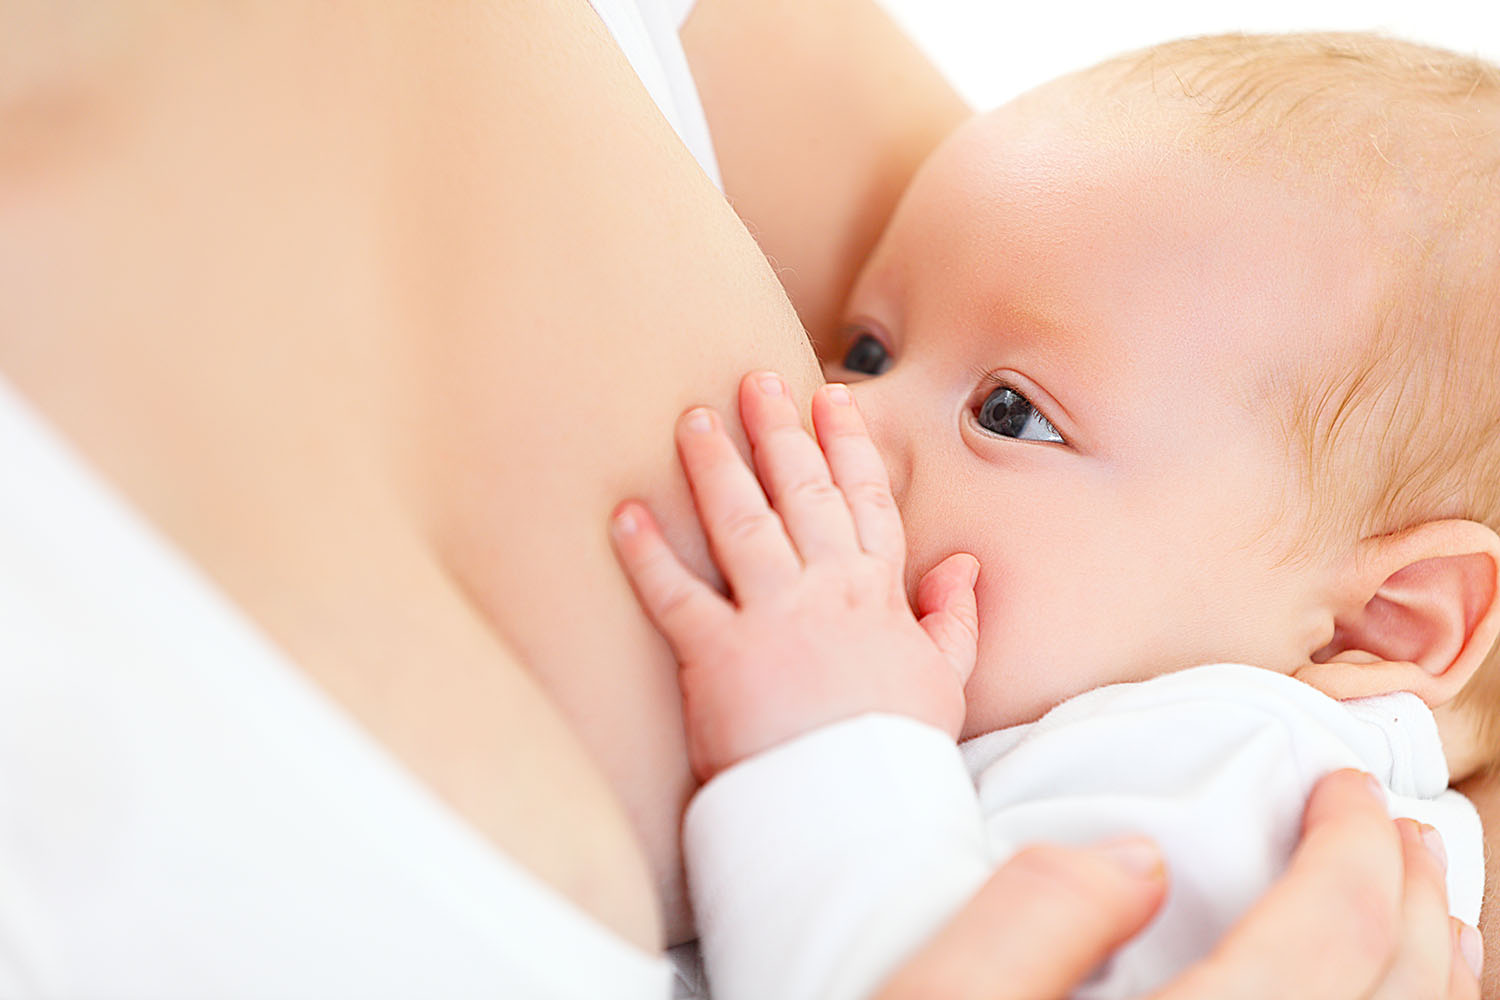 How Long Does It Take To Induce Lactation Without Being Pregnant?